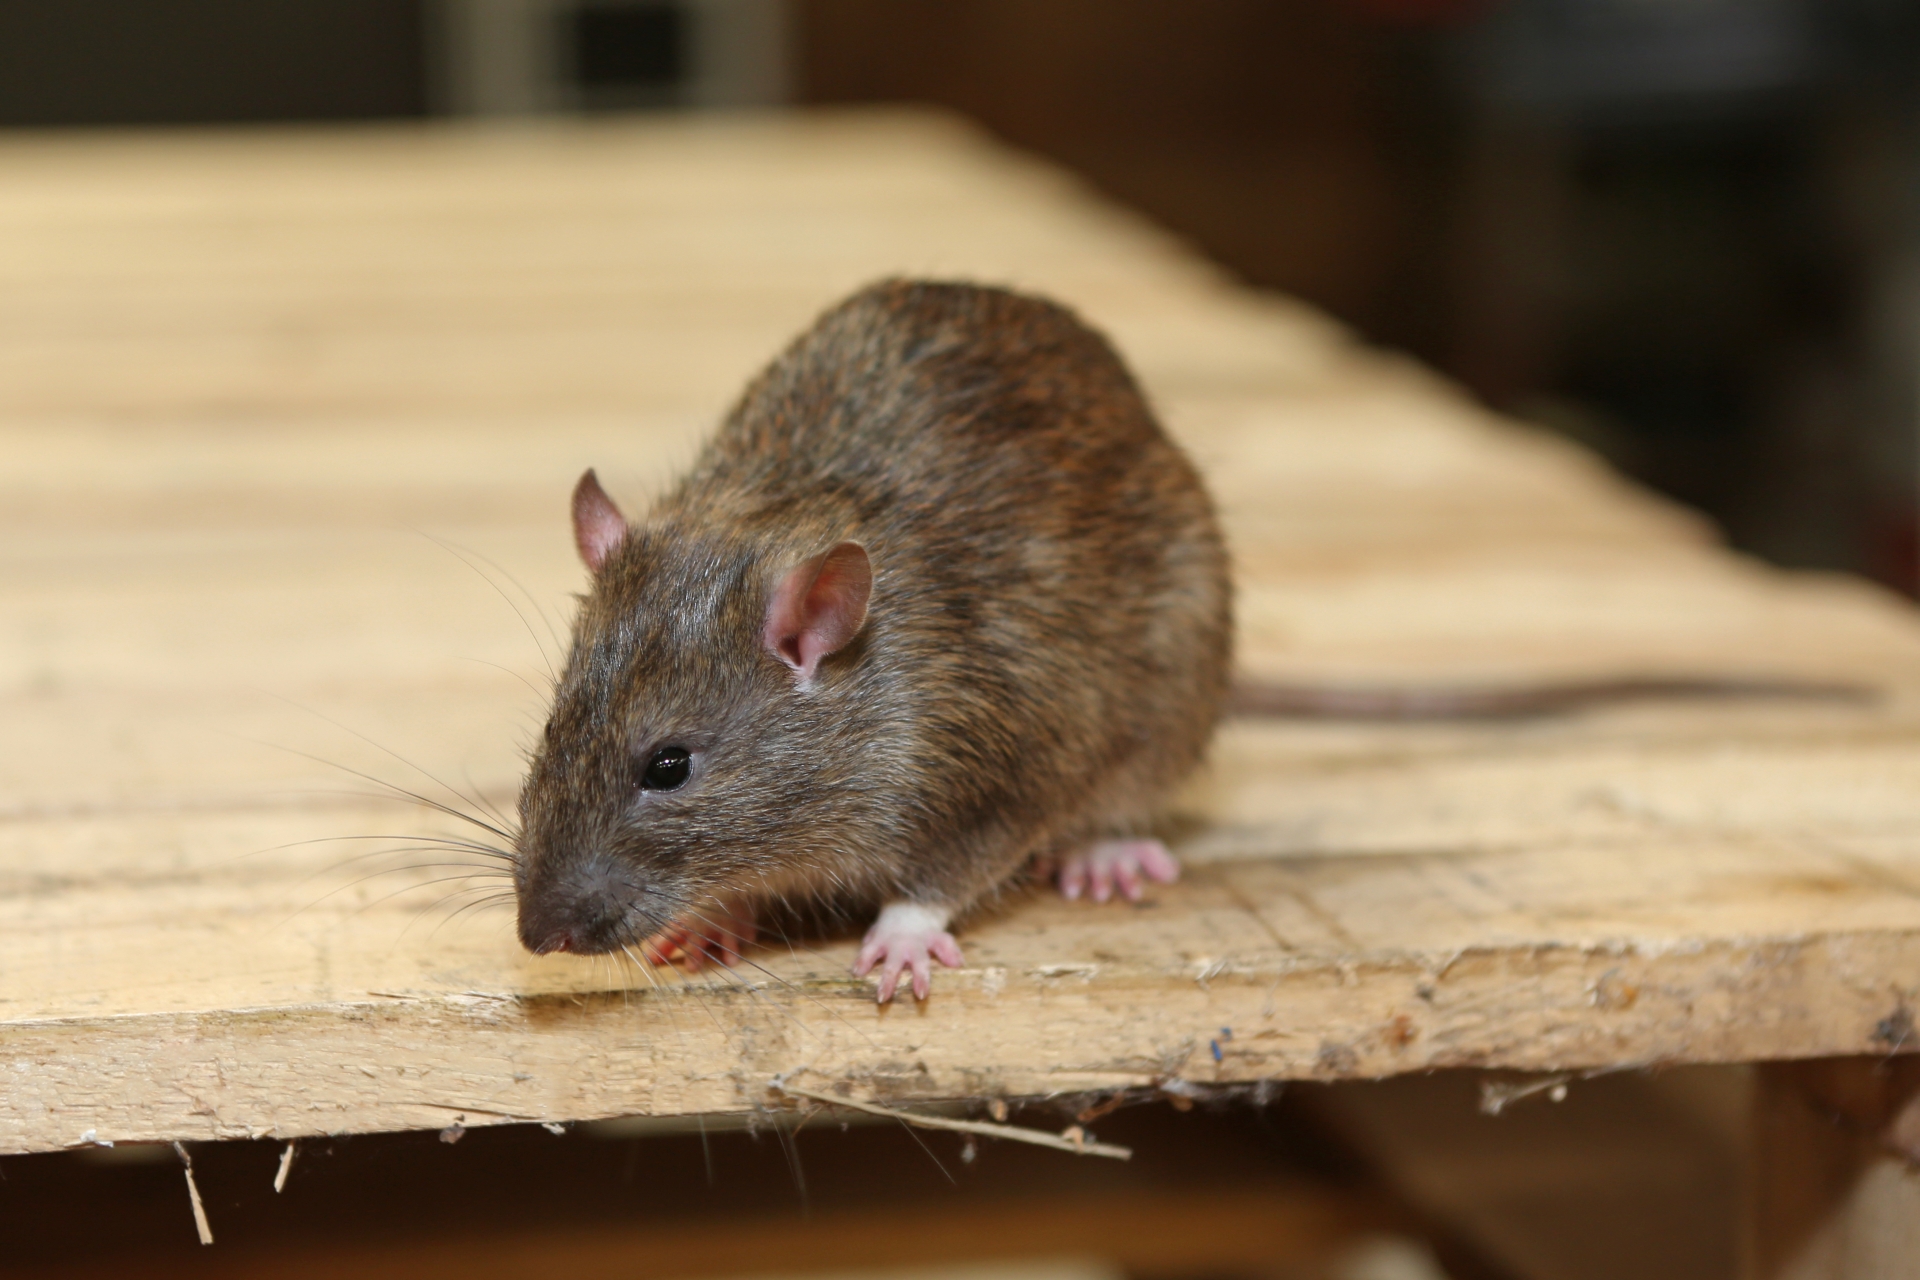 Rat Infestation, Pest Control in Havering-atte-Bower, Abridge, RM4. Call Now 020 8166 9746